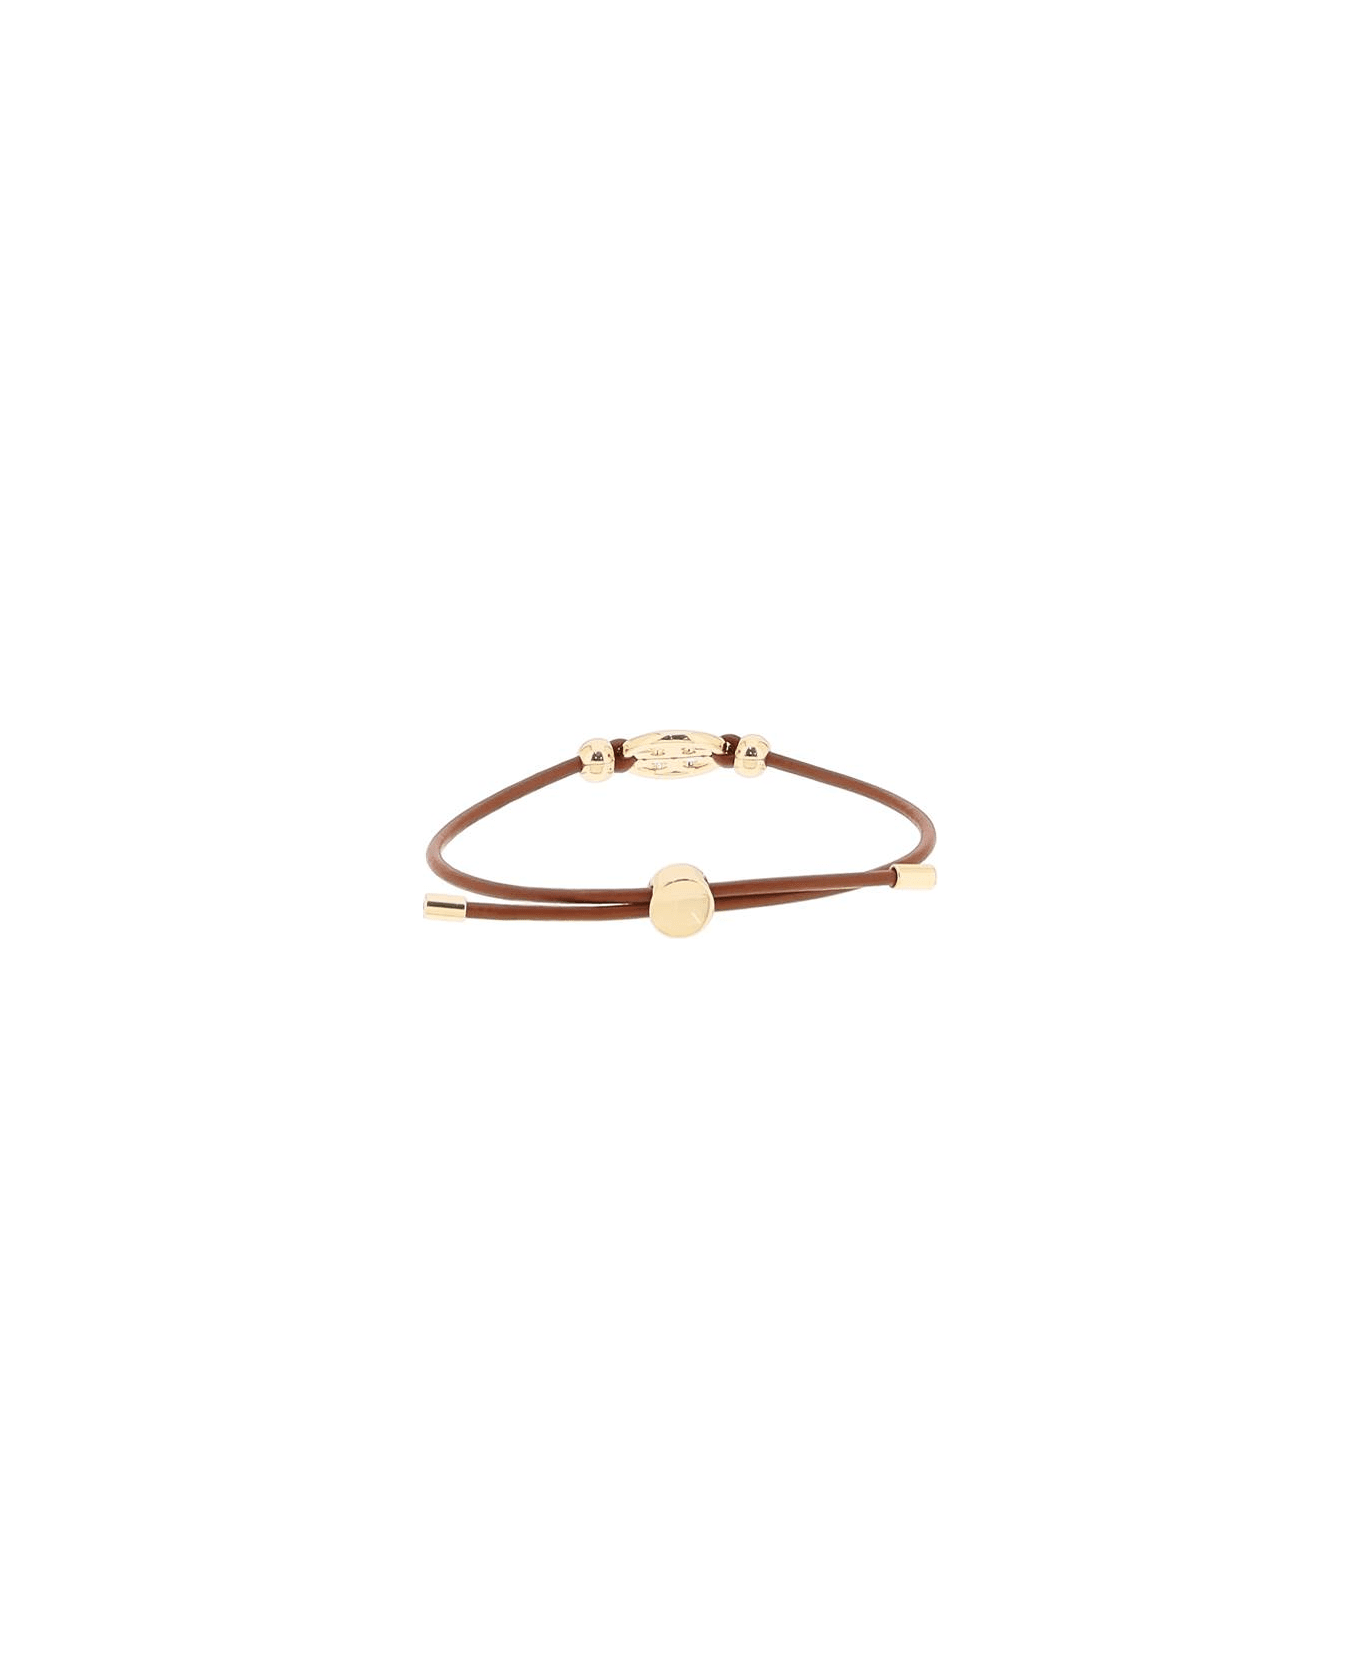 Tory Burch Miller Slider Bracelet - TORY GOLD CUOIO (Brown) ブレスレット